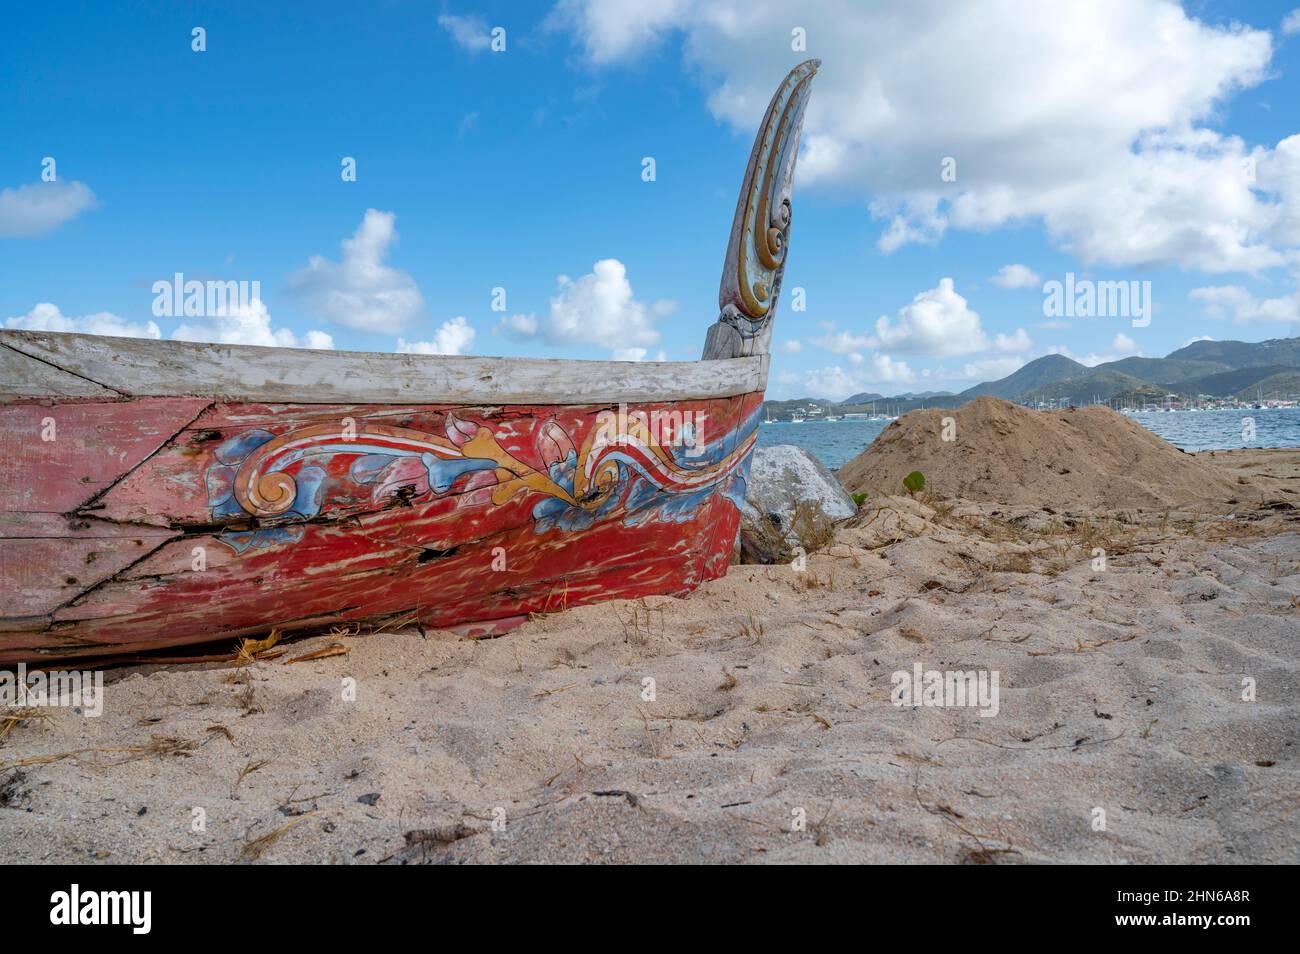 Traditional wooden boats, seen on the beach of Nettle Bay / Baie Nettlé on the French side of the island Saint-Martin / Sint Maarten Stock Photo